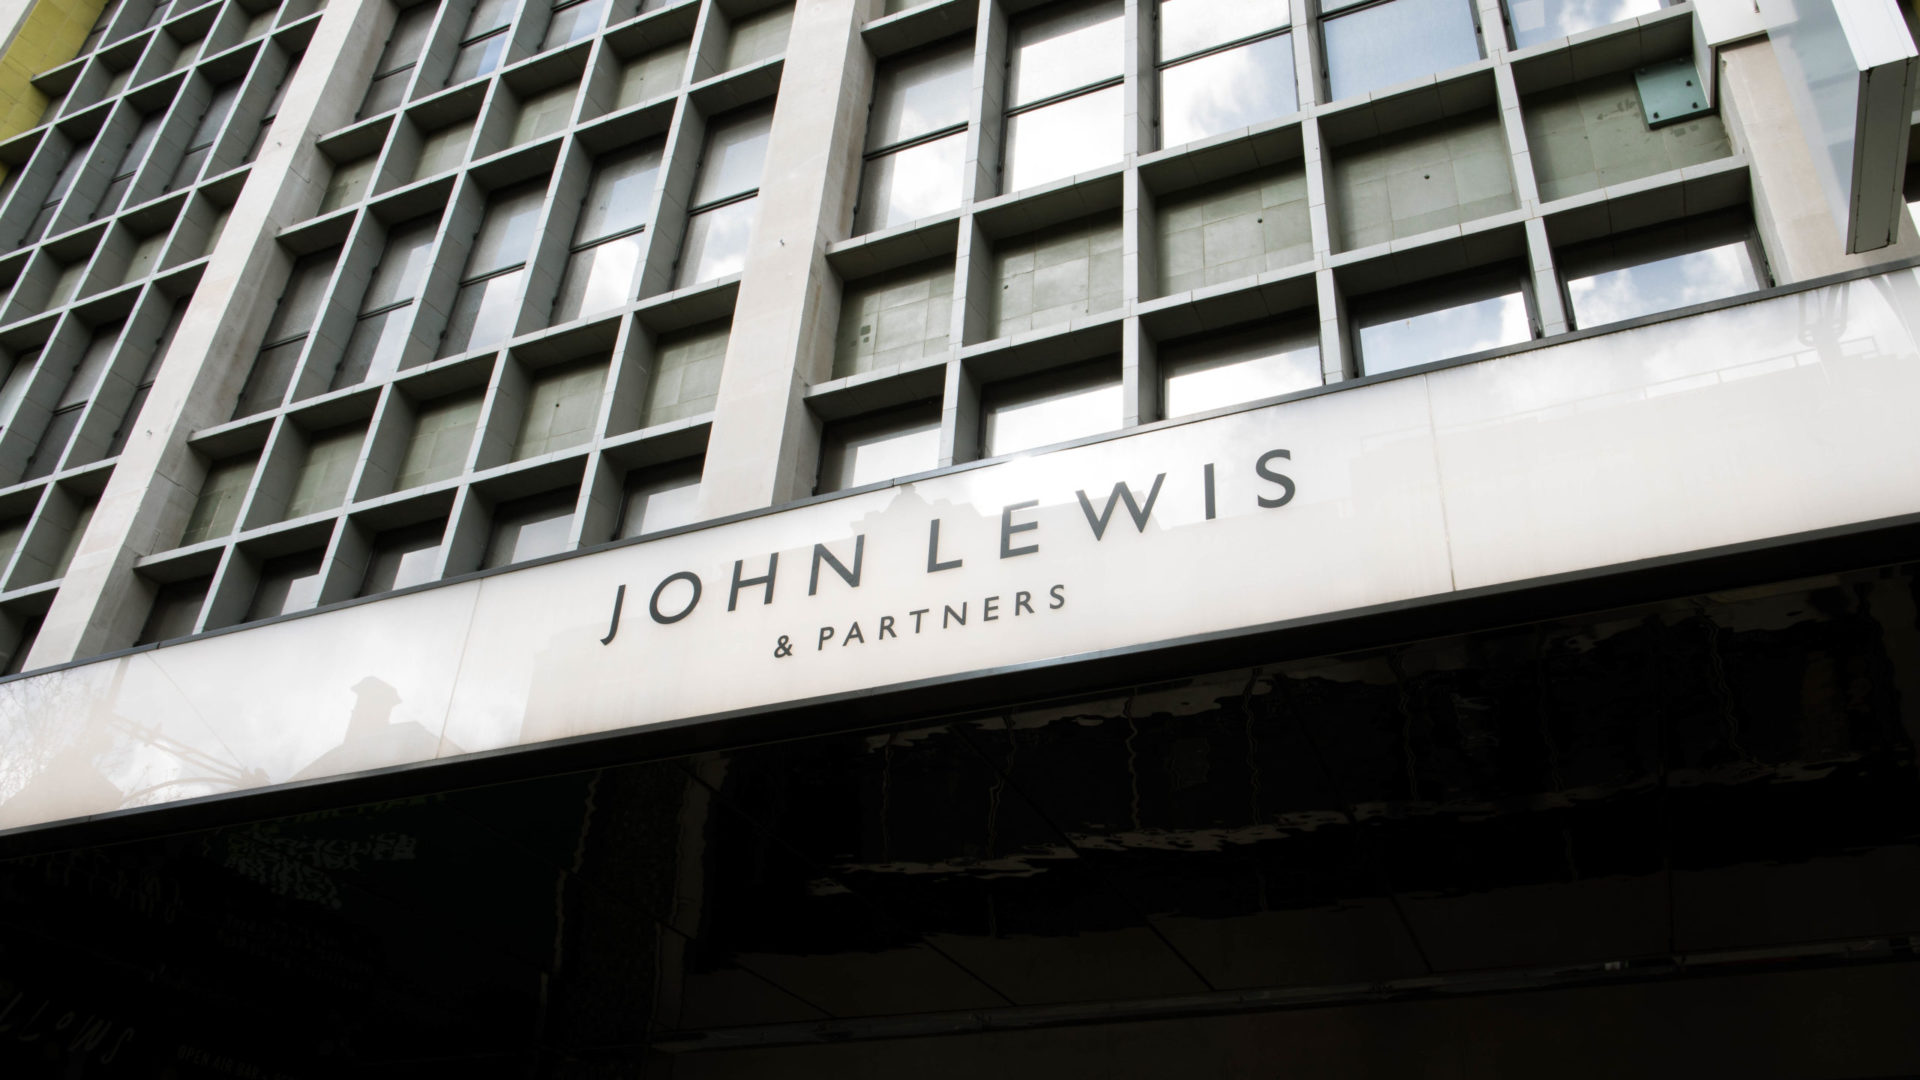 John Lewis to retire 'Never Knowingly Undersold' price promise